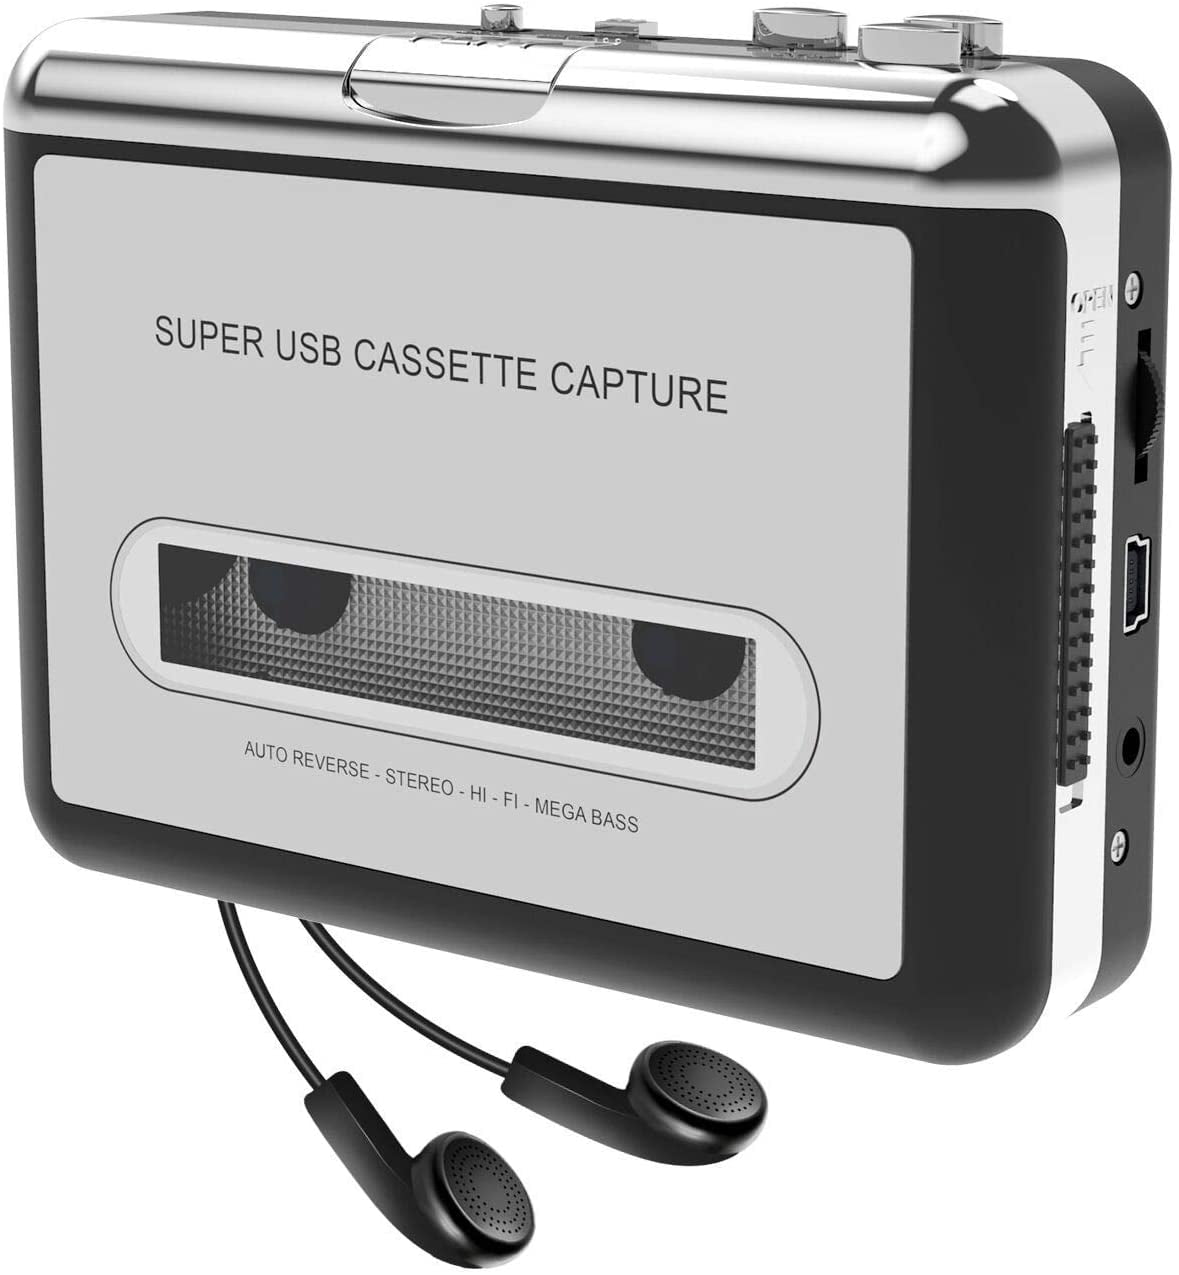 Powered by Battery or USB,Convert Walkman Tape Cassette to MP3 Compatible with Laptop and PC Cassette Player-Cassette Tape to MP3 CD Converter 